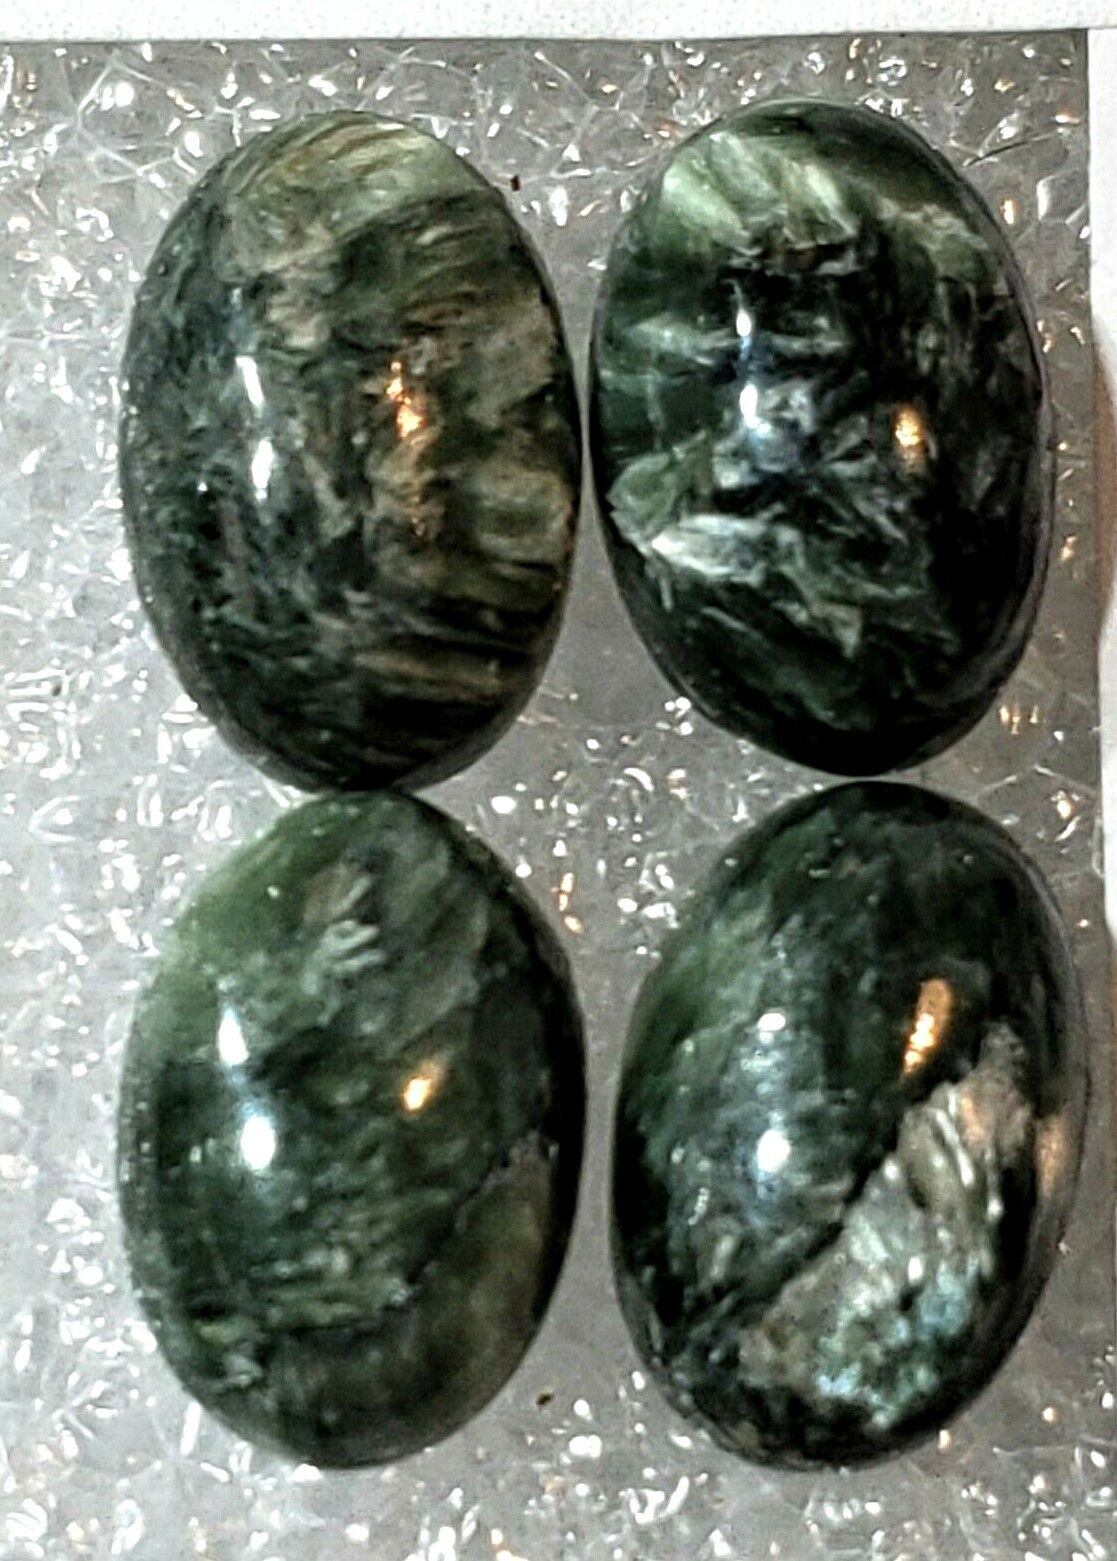  Metaphysical Angel Stone seraphinite 4 oval cabochons size 10 x 14 mm  Без бренда